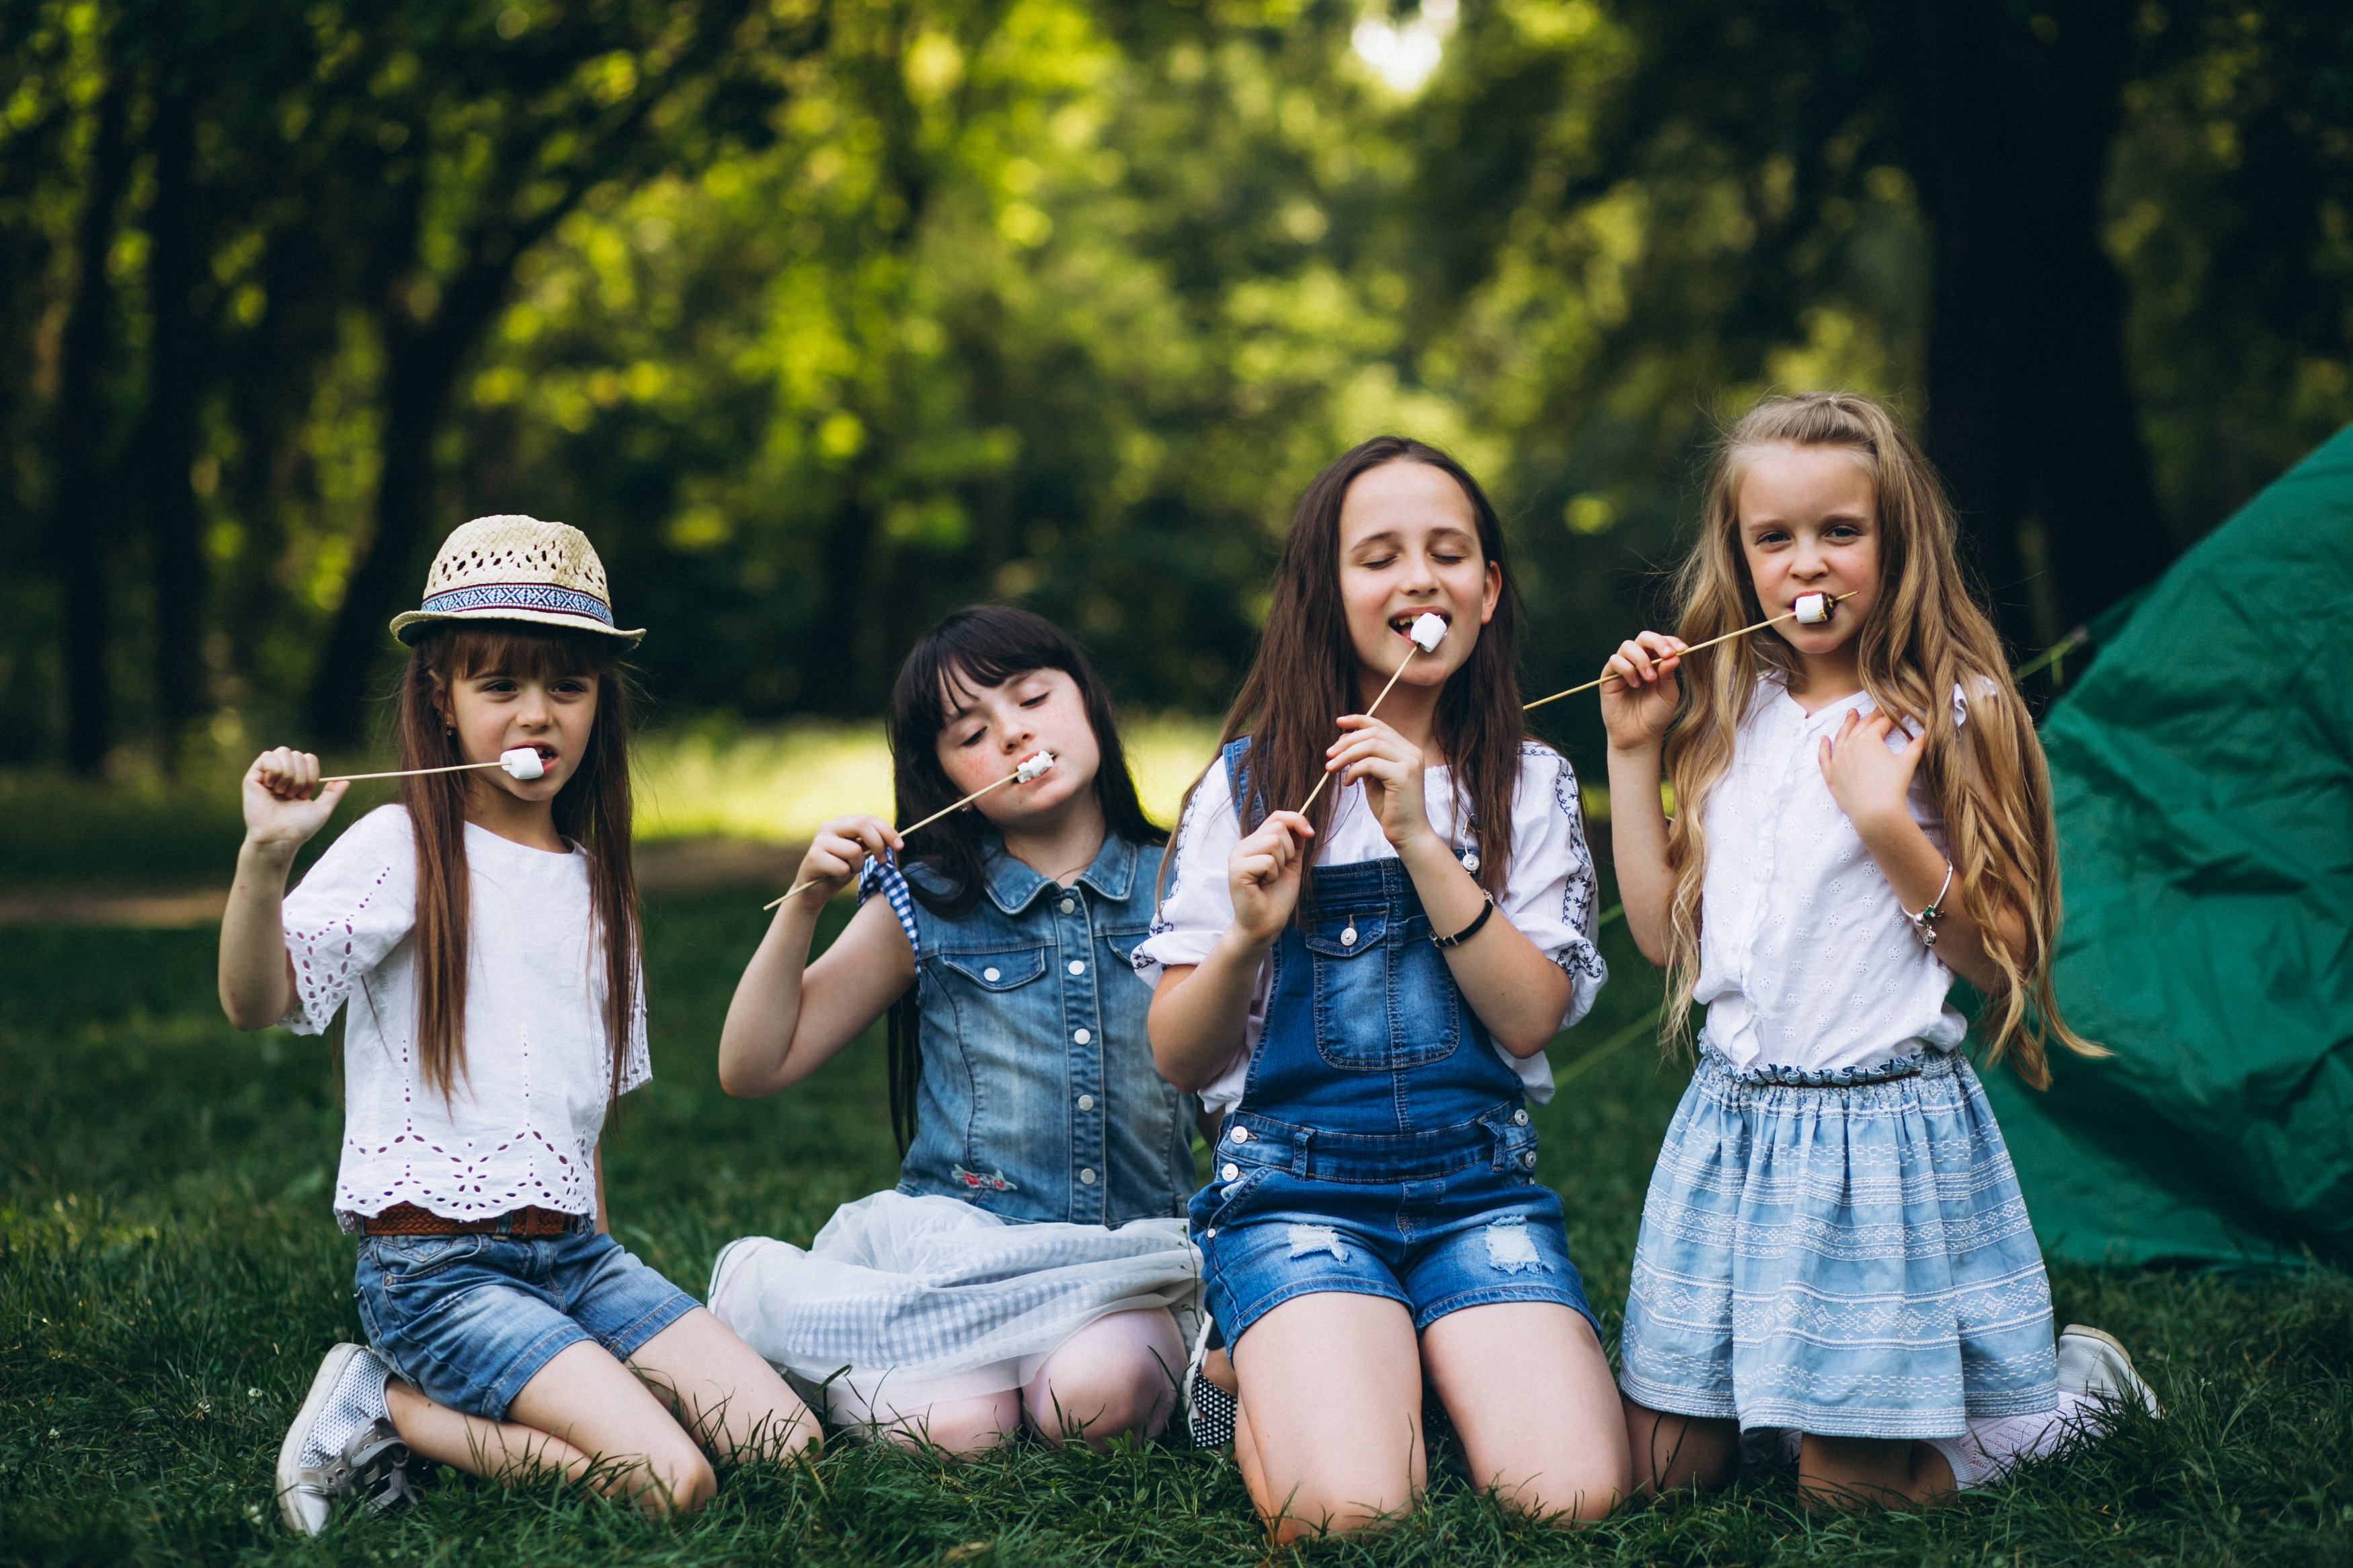 A group of young girls eating smores